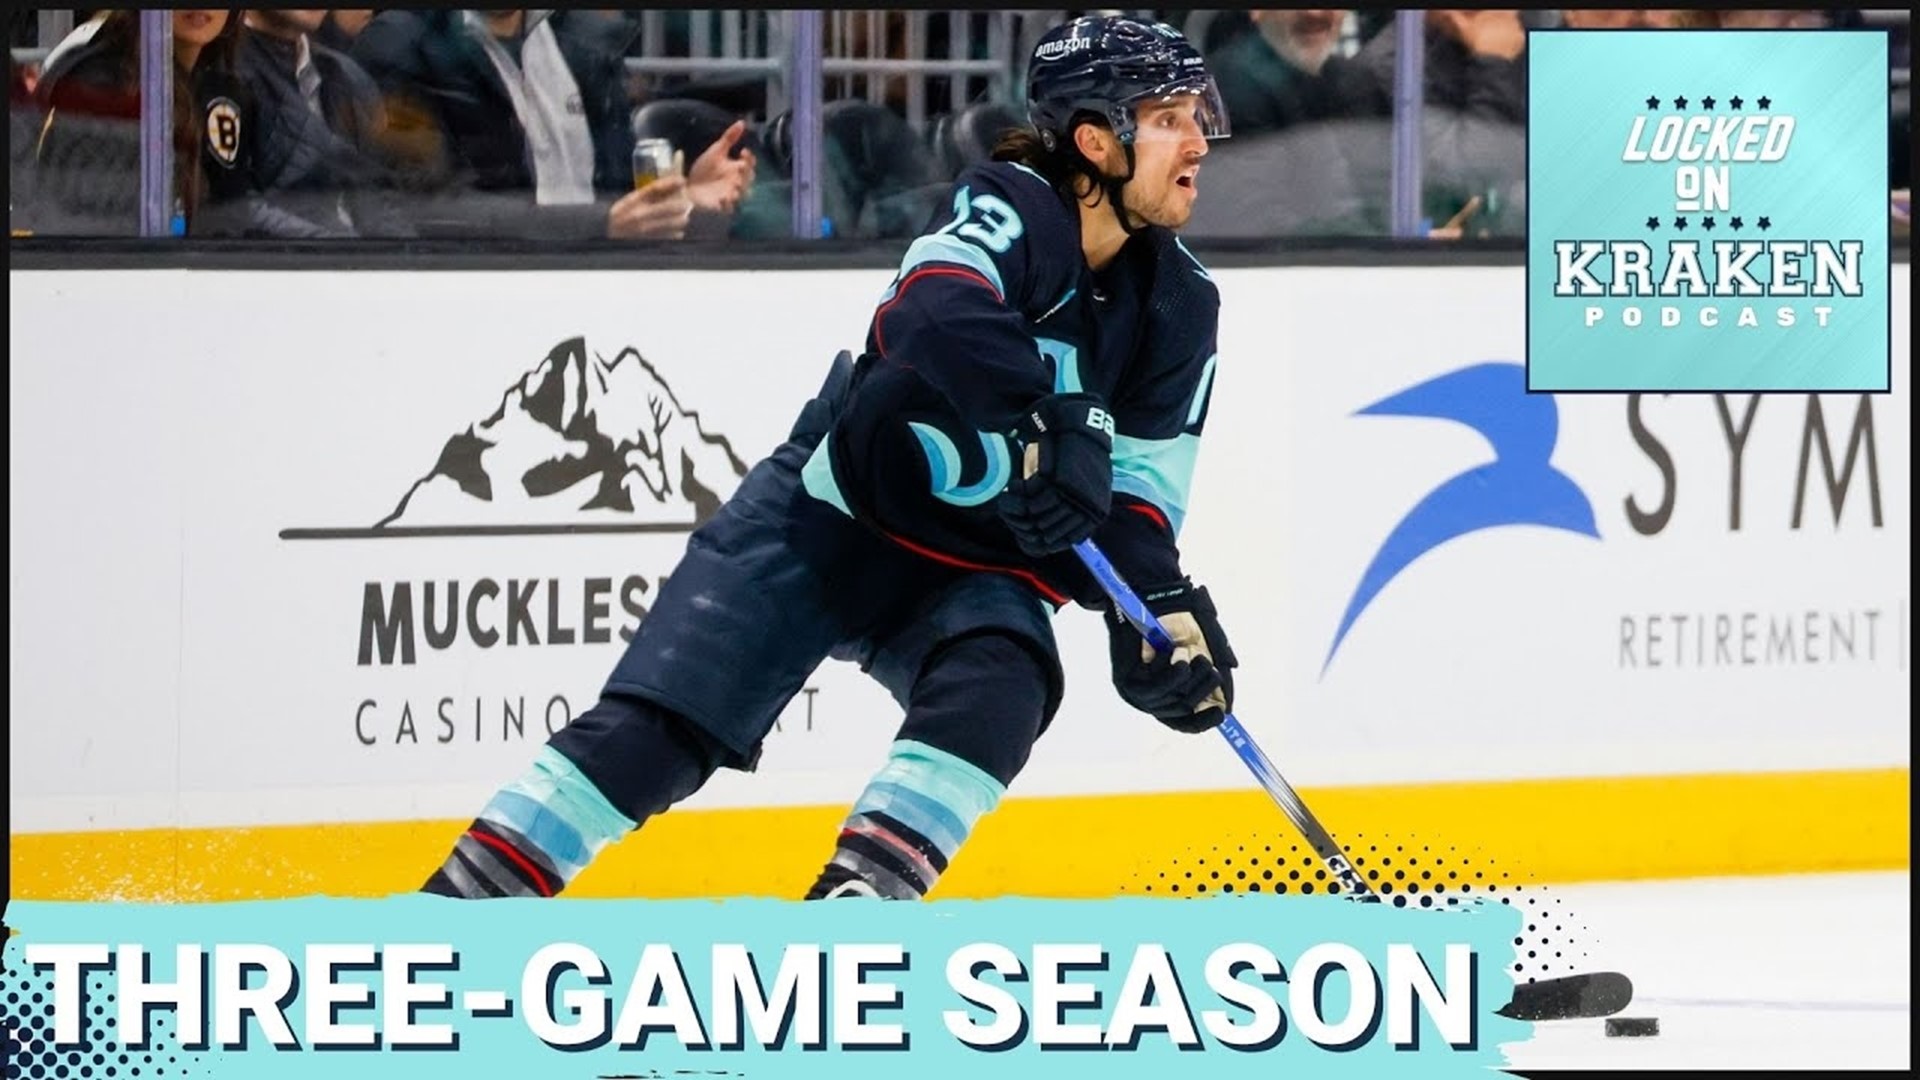 The Seattle Kraken will close this recent homestand with a game against the Edmonton Oilers.